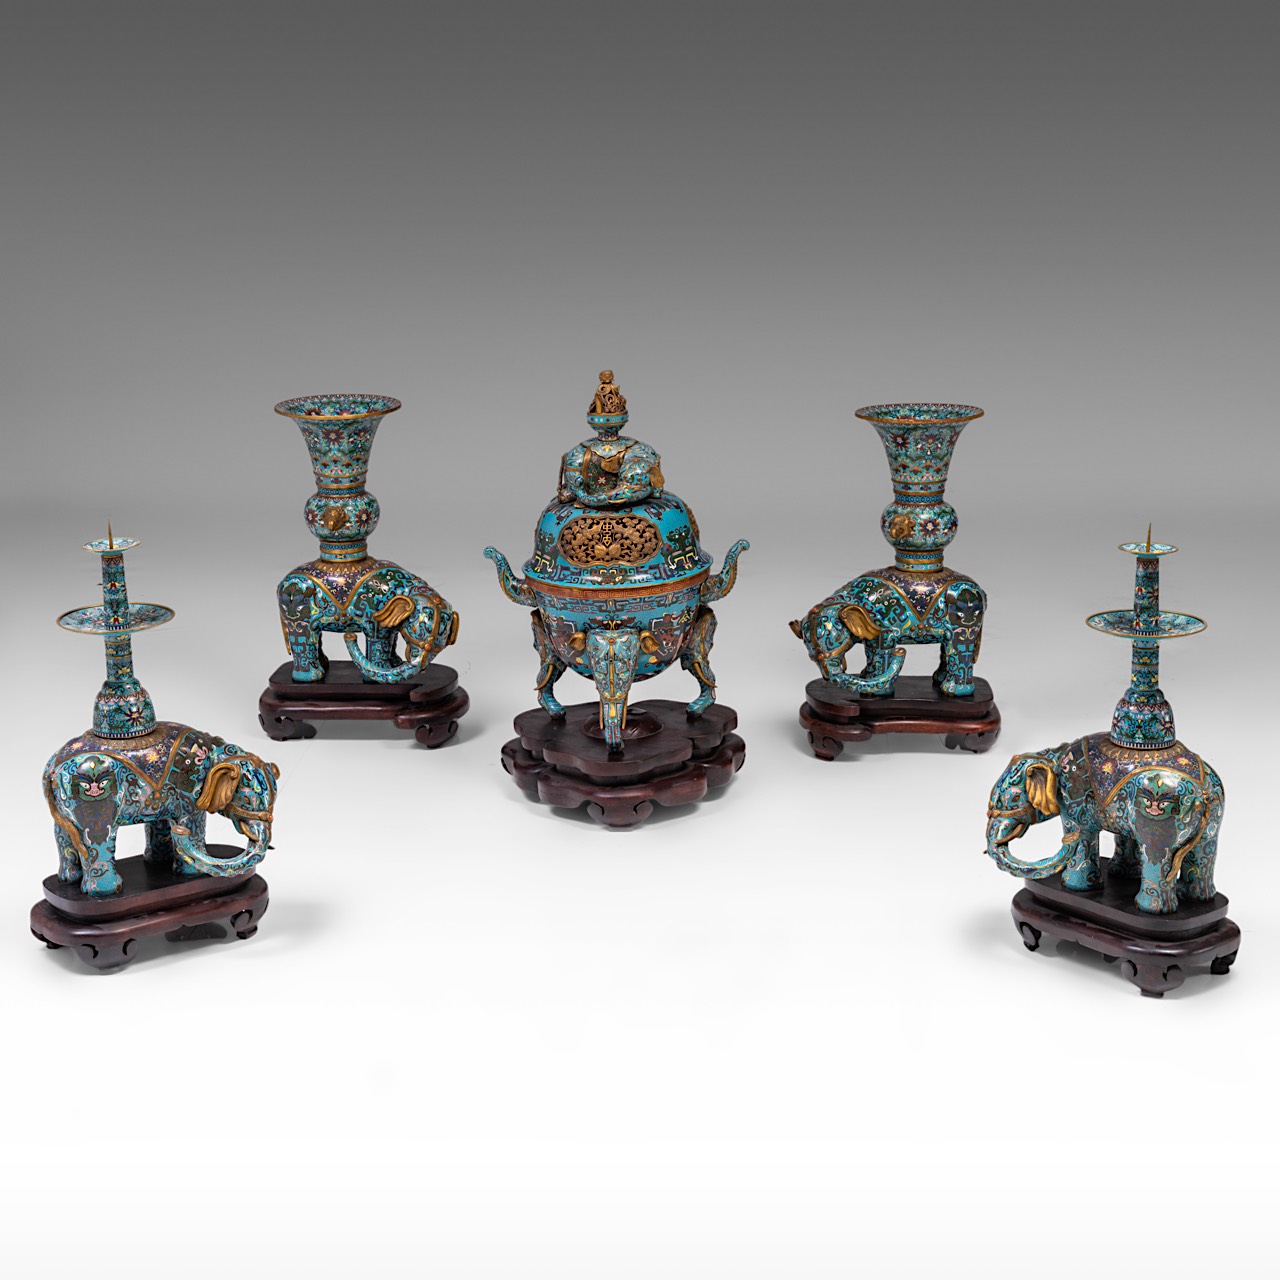 A Chinese five-piece semi-precious stone inlaid cloisonne garniture, late Qing/20thC, tallest H 58 - - Image 3 of 24